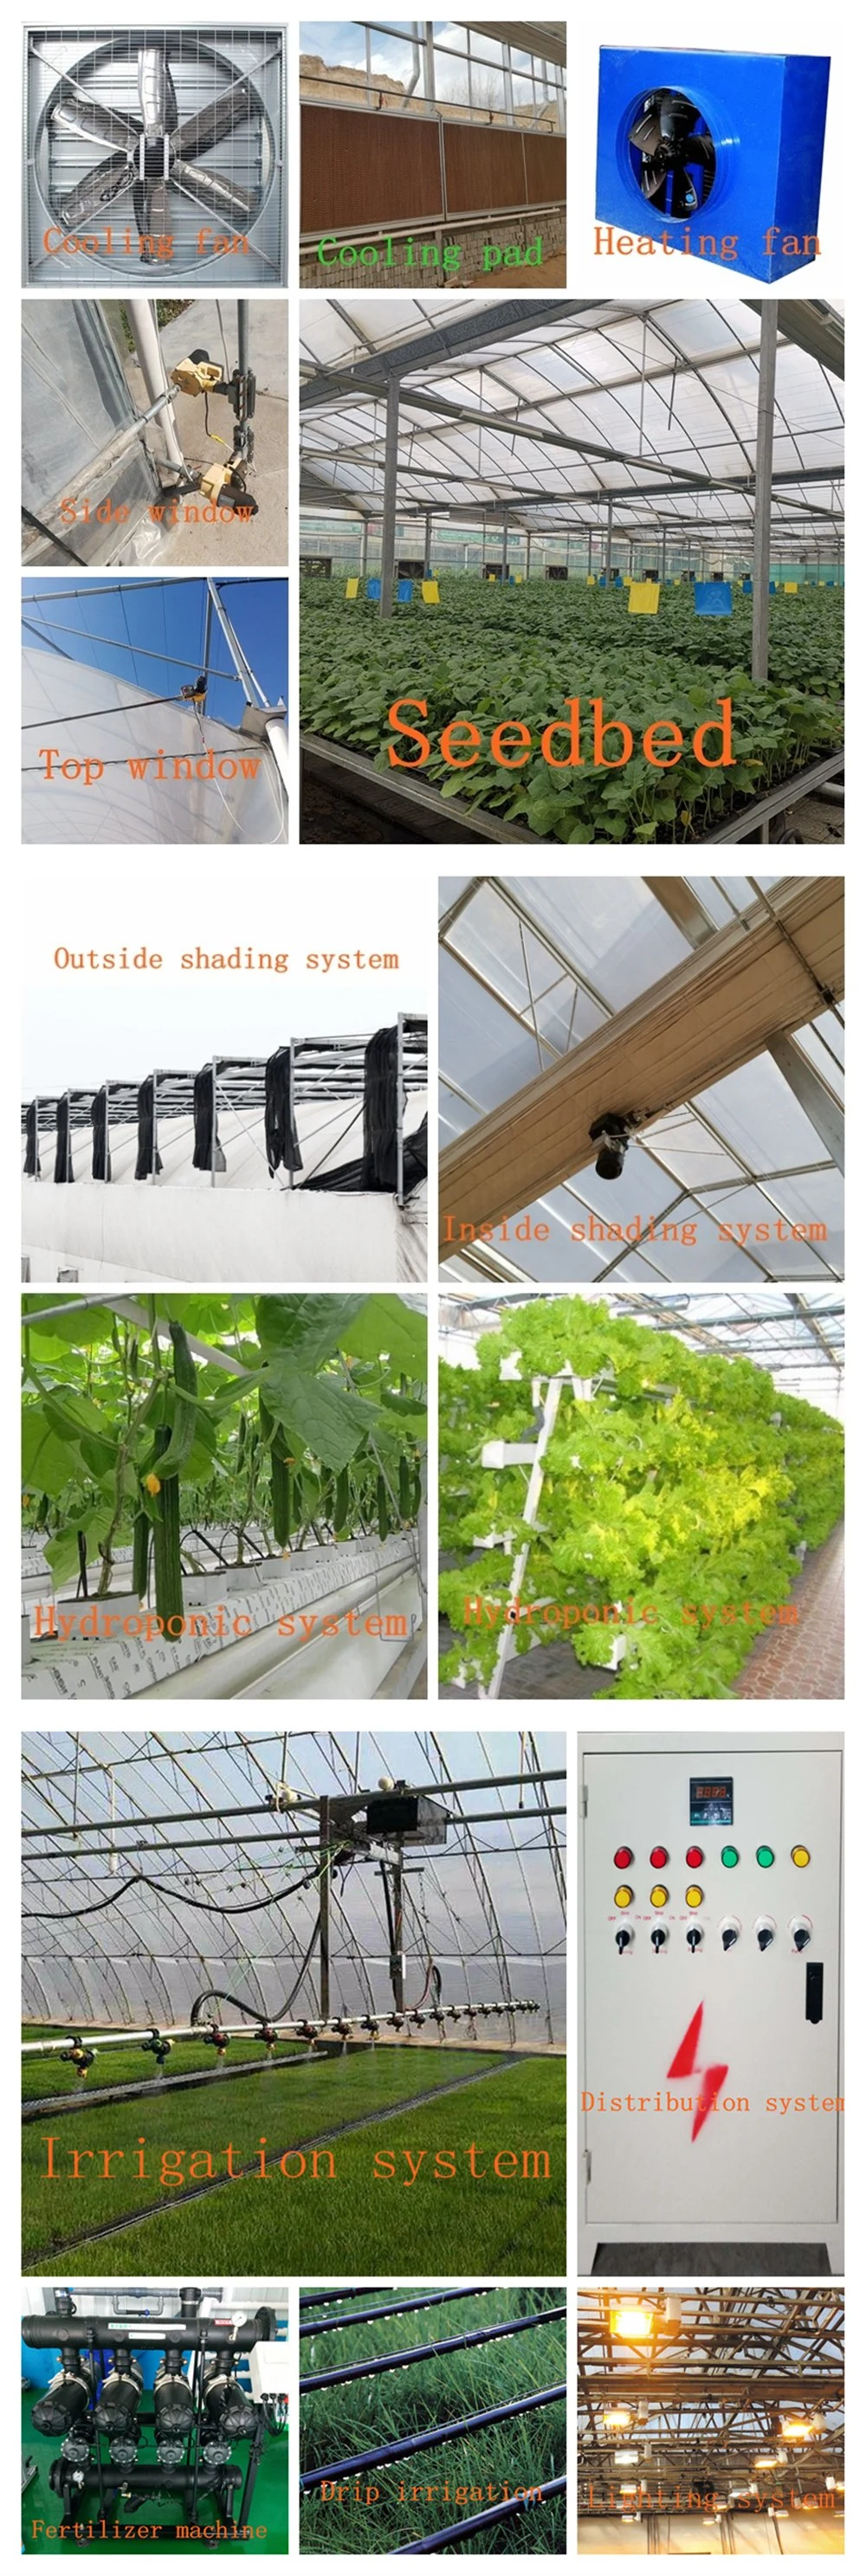 Agricultural Plastic Multi-Span Arch Tunnel Film Hydroponic Greenhouse for Farming/Planting/Cucumber/Flower/Tomato